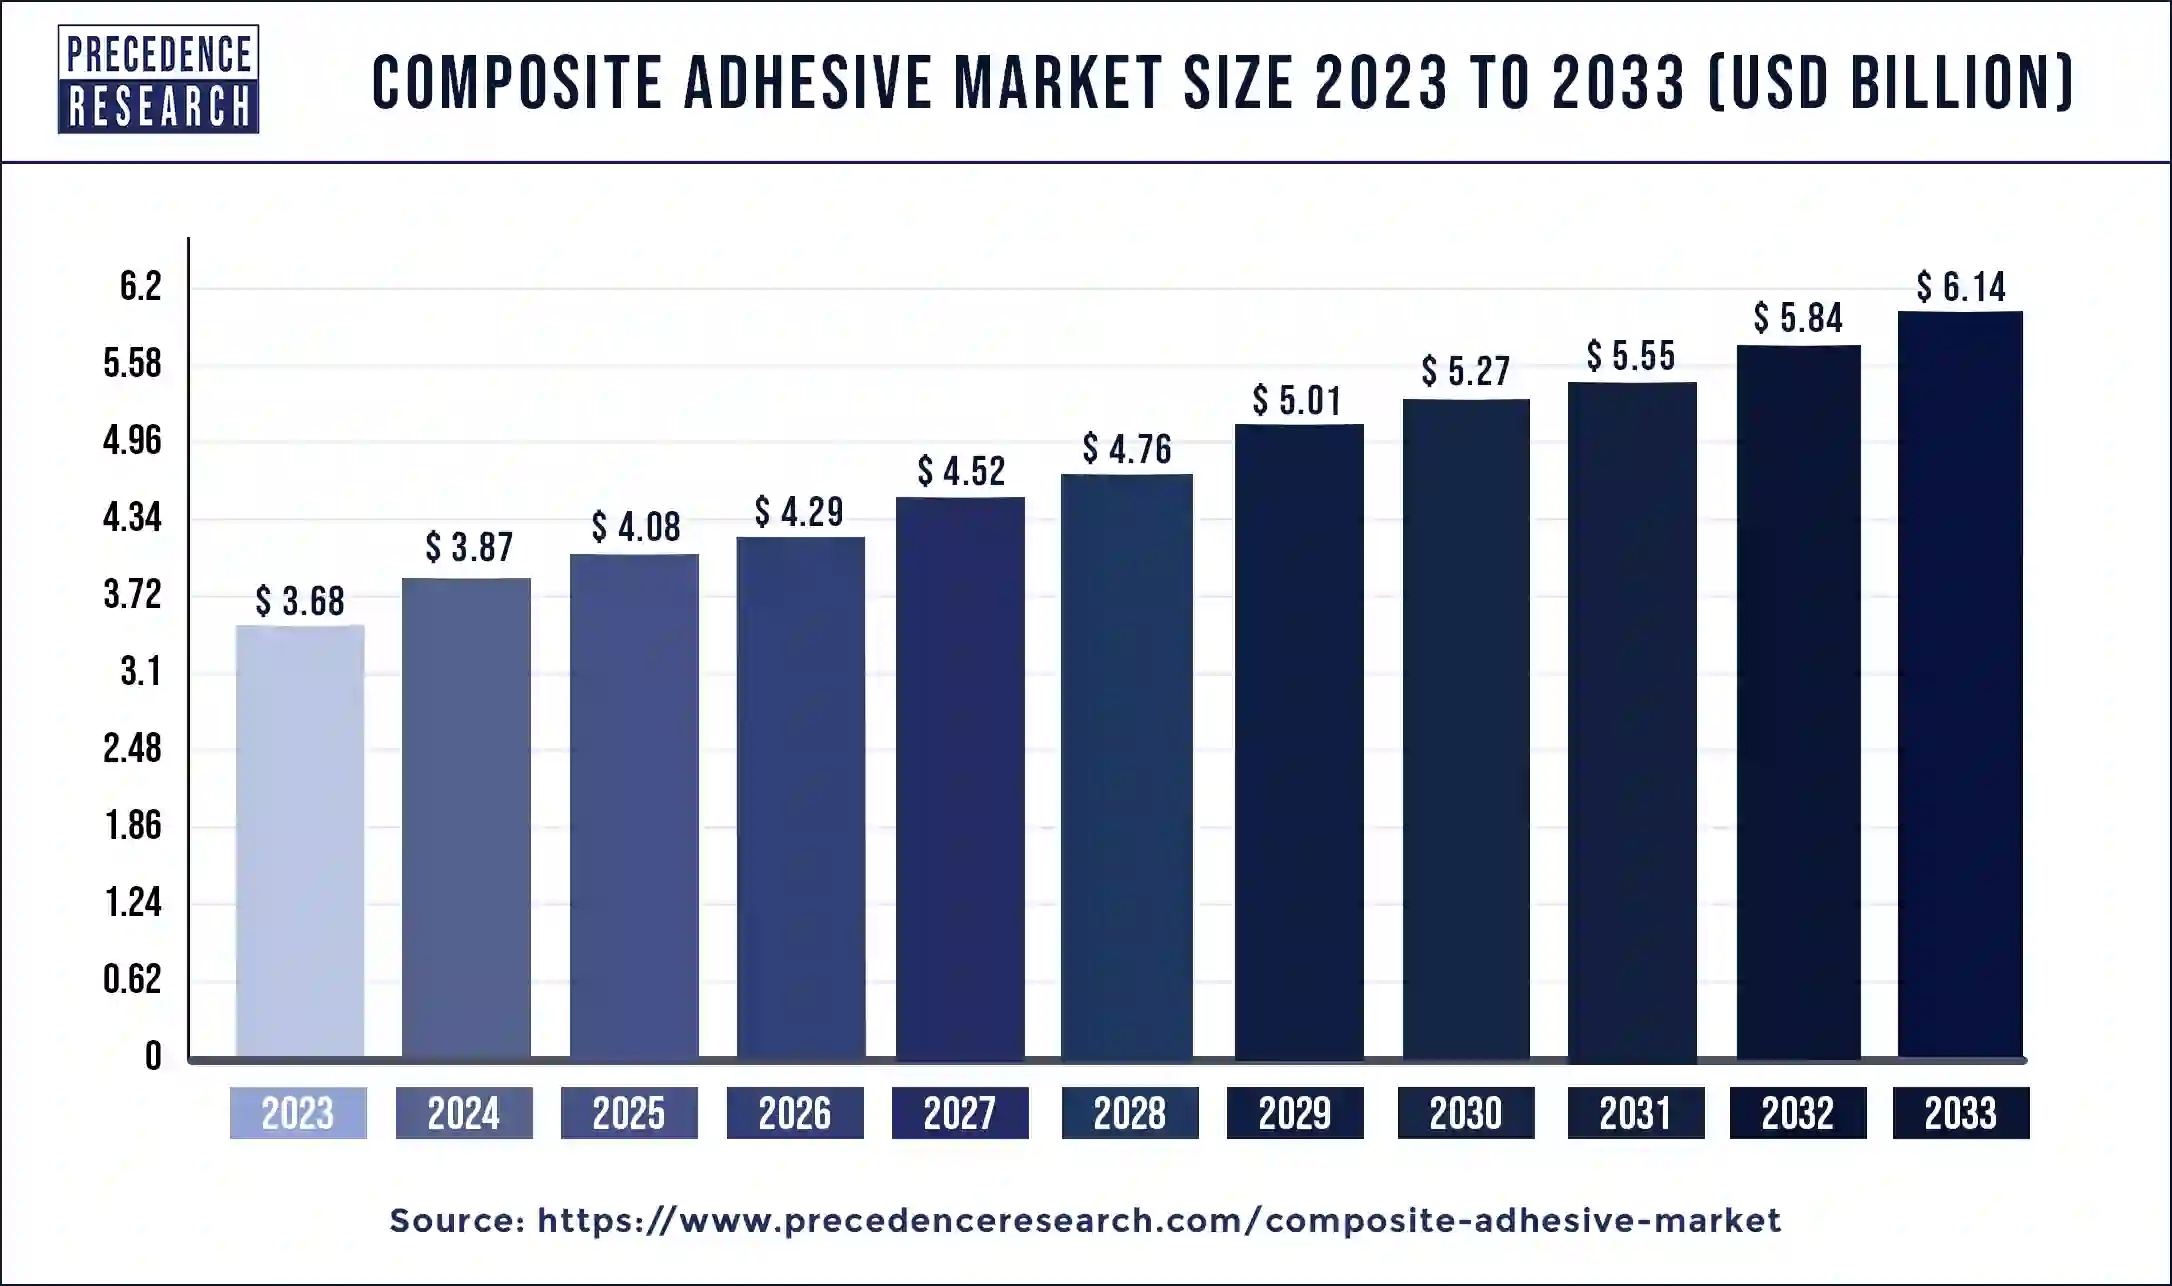 Composite Adhesive Market Size 2024 to 2033